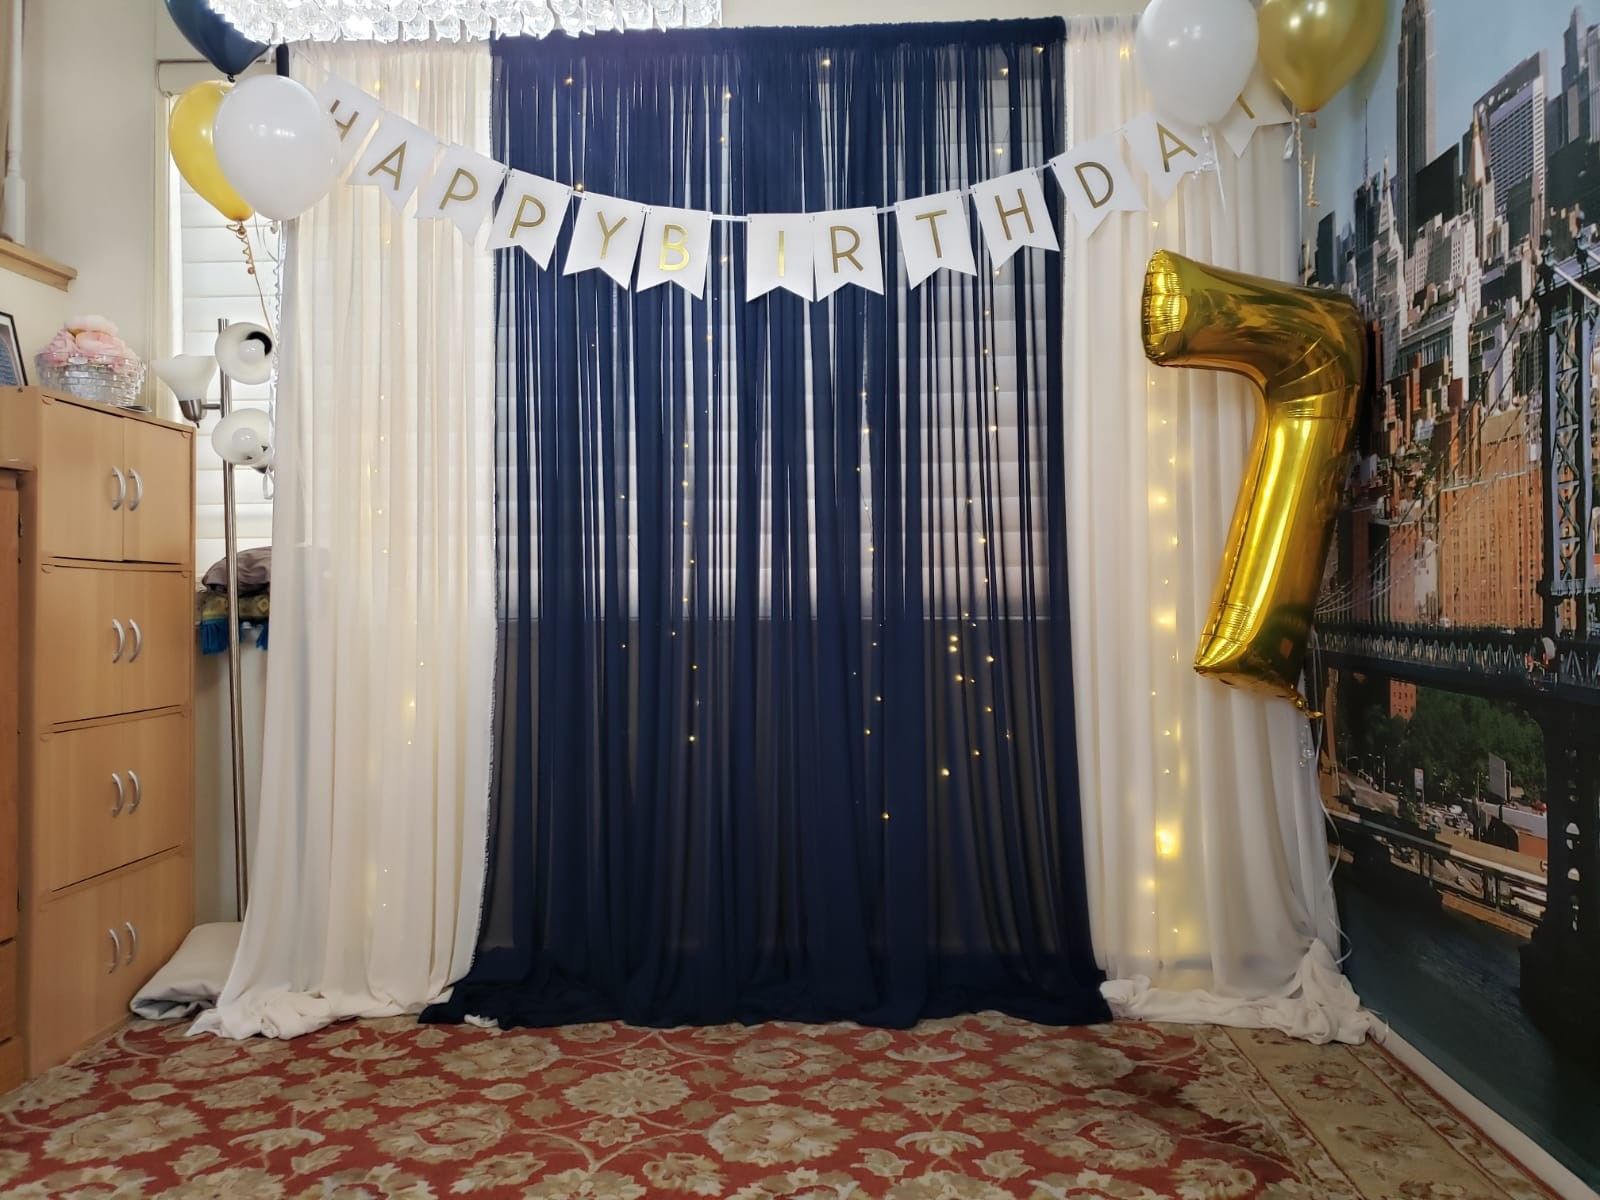 Backdrop for 7th birthday parties